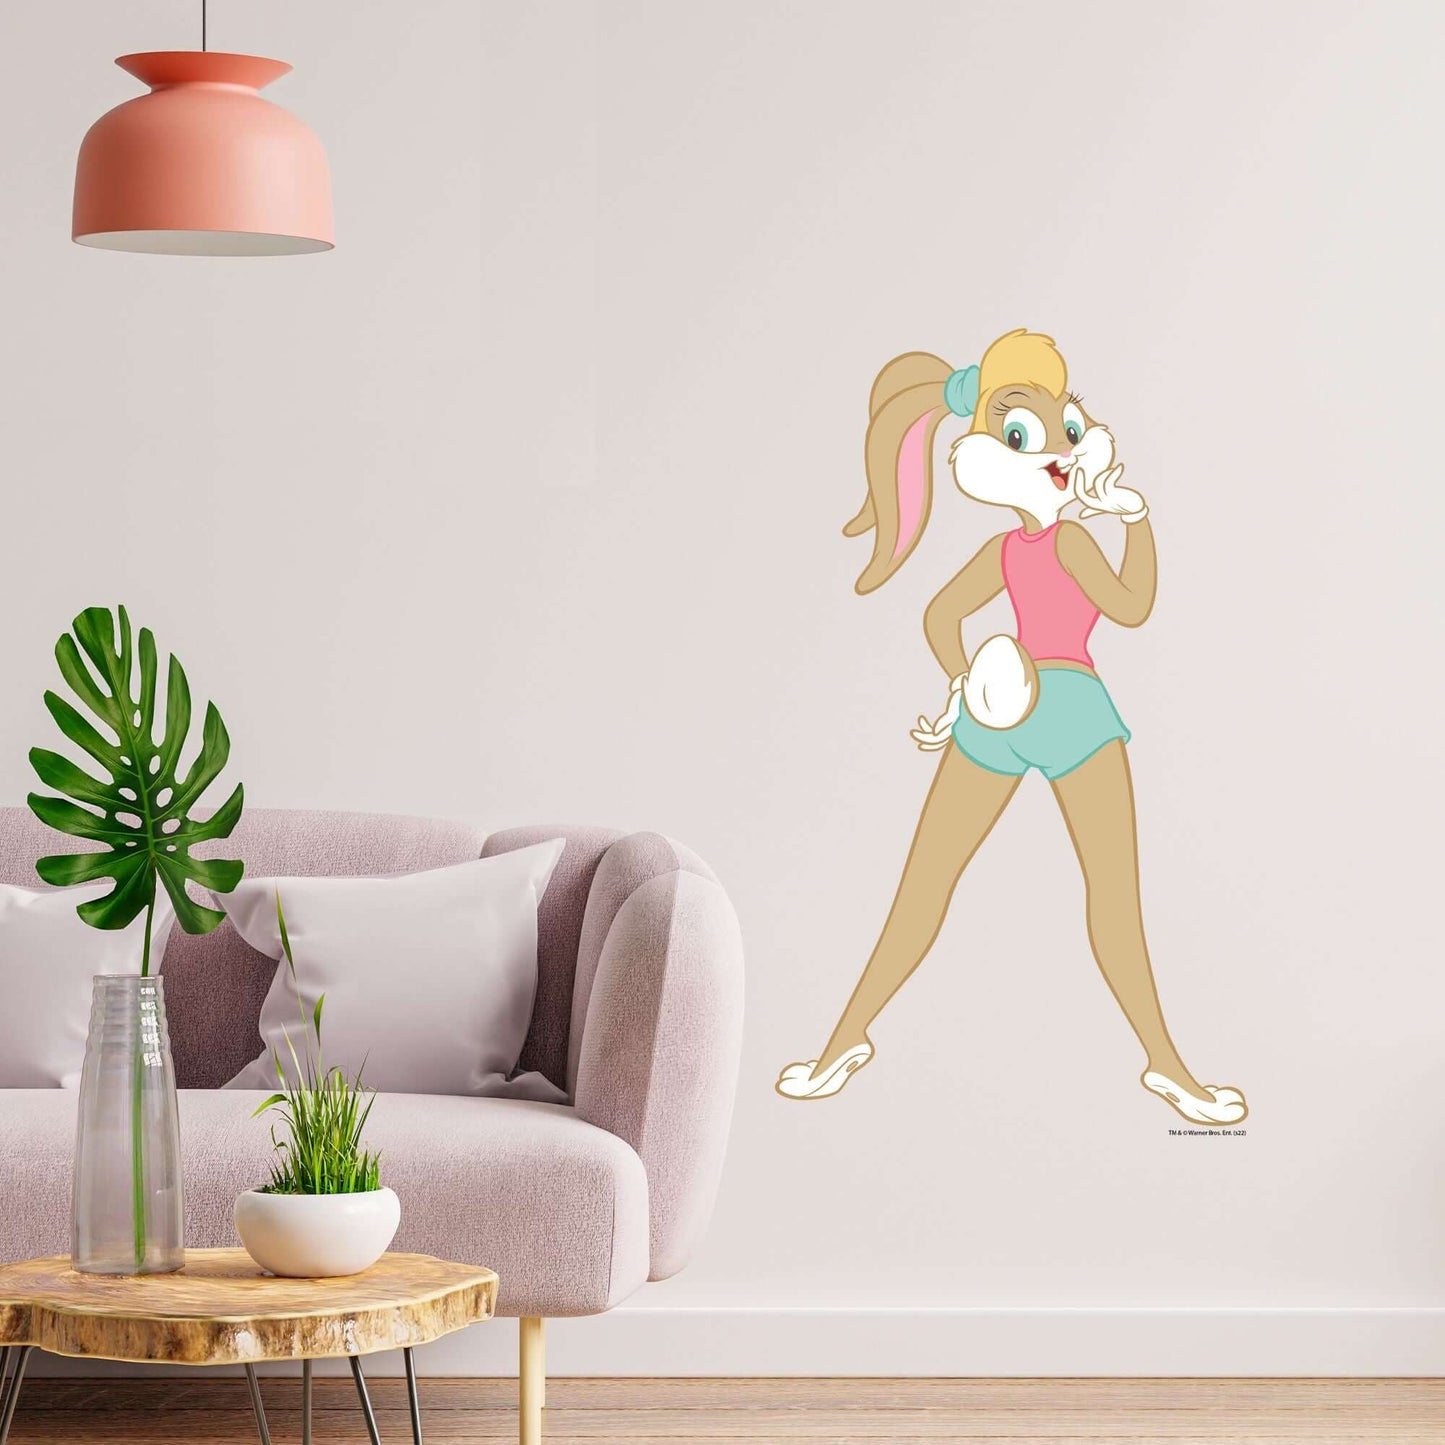 Kismet Decals Looney Tunes Lola Bunny Look Back Licensed Wall Sticker - Easy DIY Home & Kids Room Decor Wall Decal Art